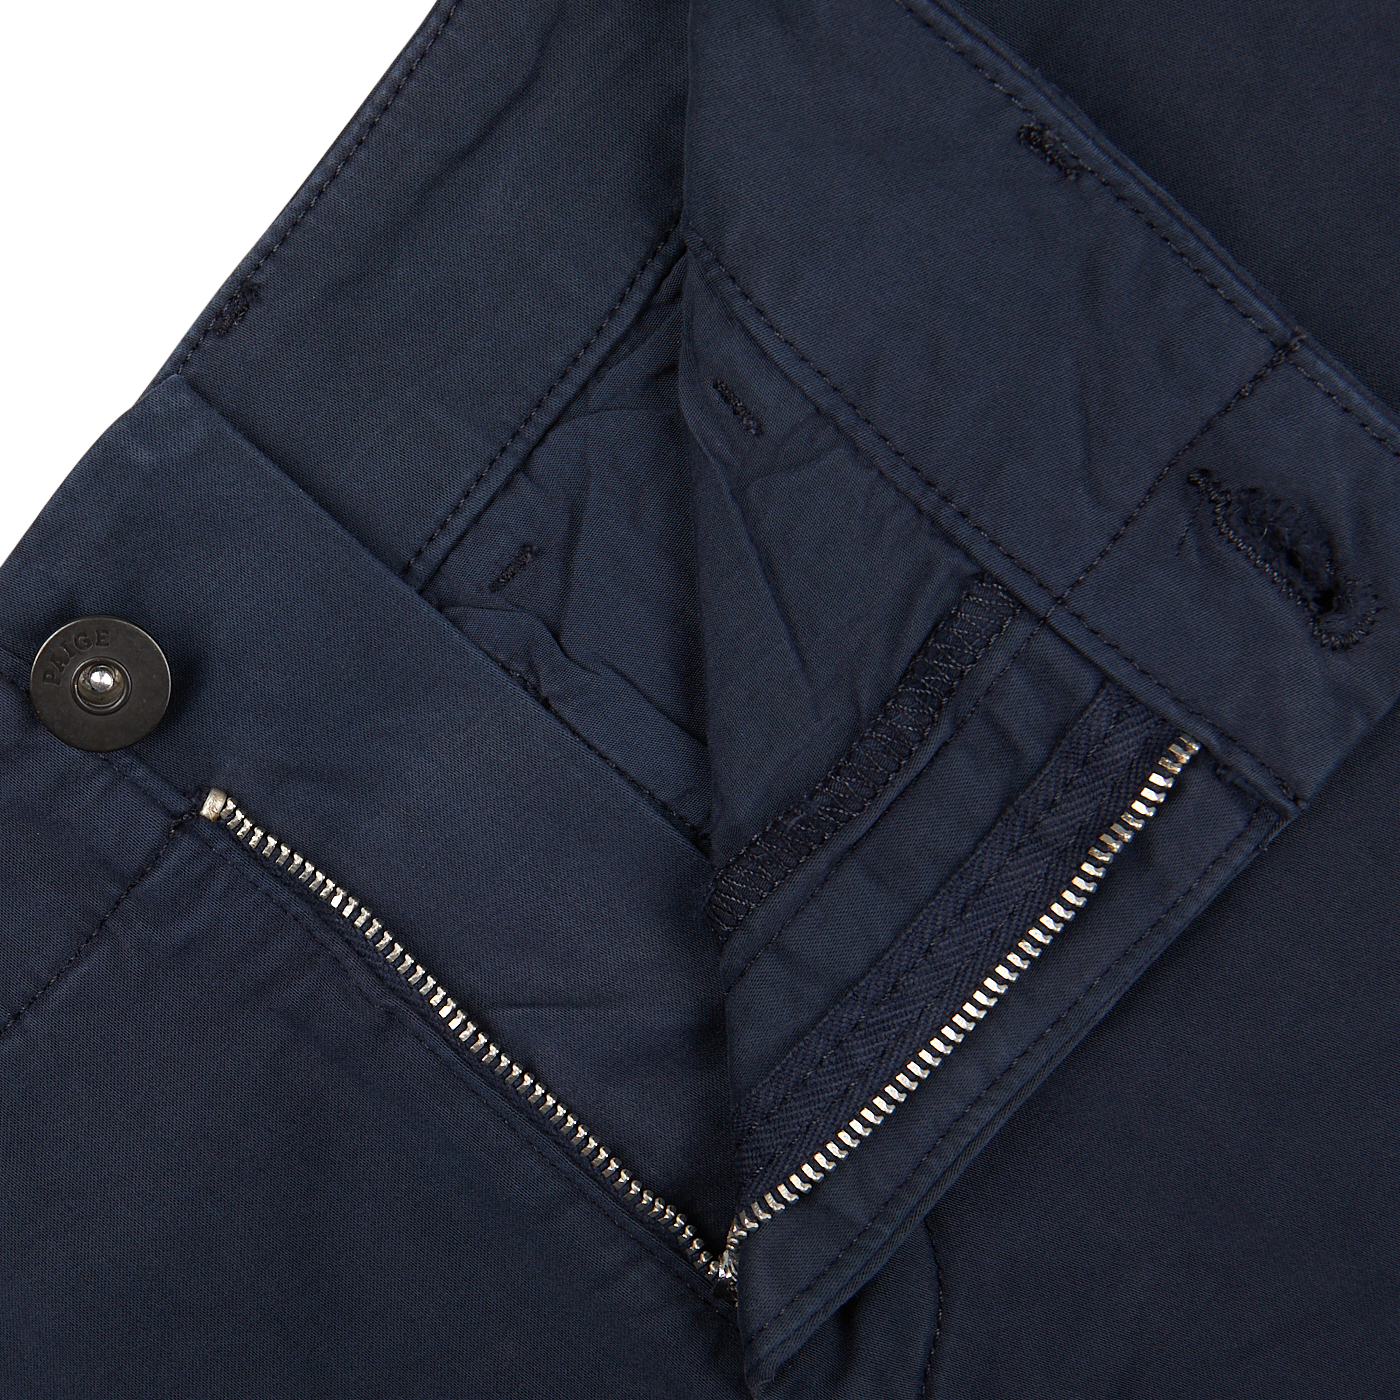 Close-up of Navy Blue Cotton Blend Paige Phillips Shorts with a zipper and button detail.